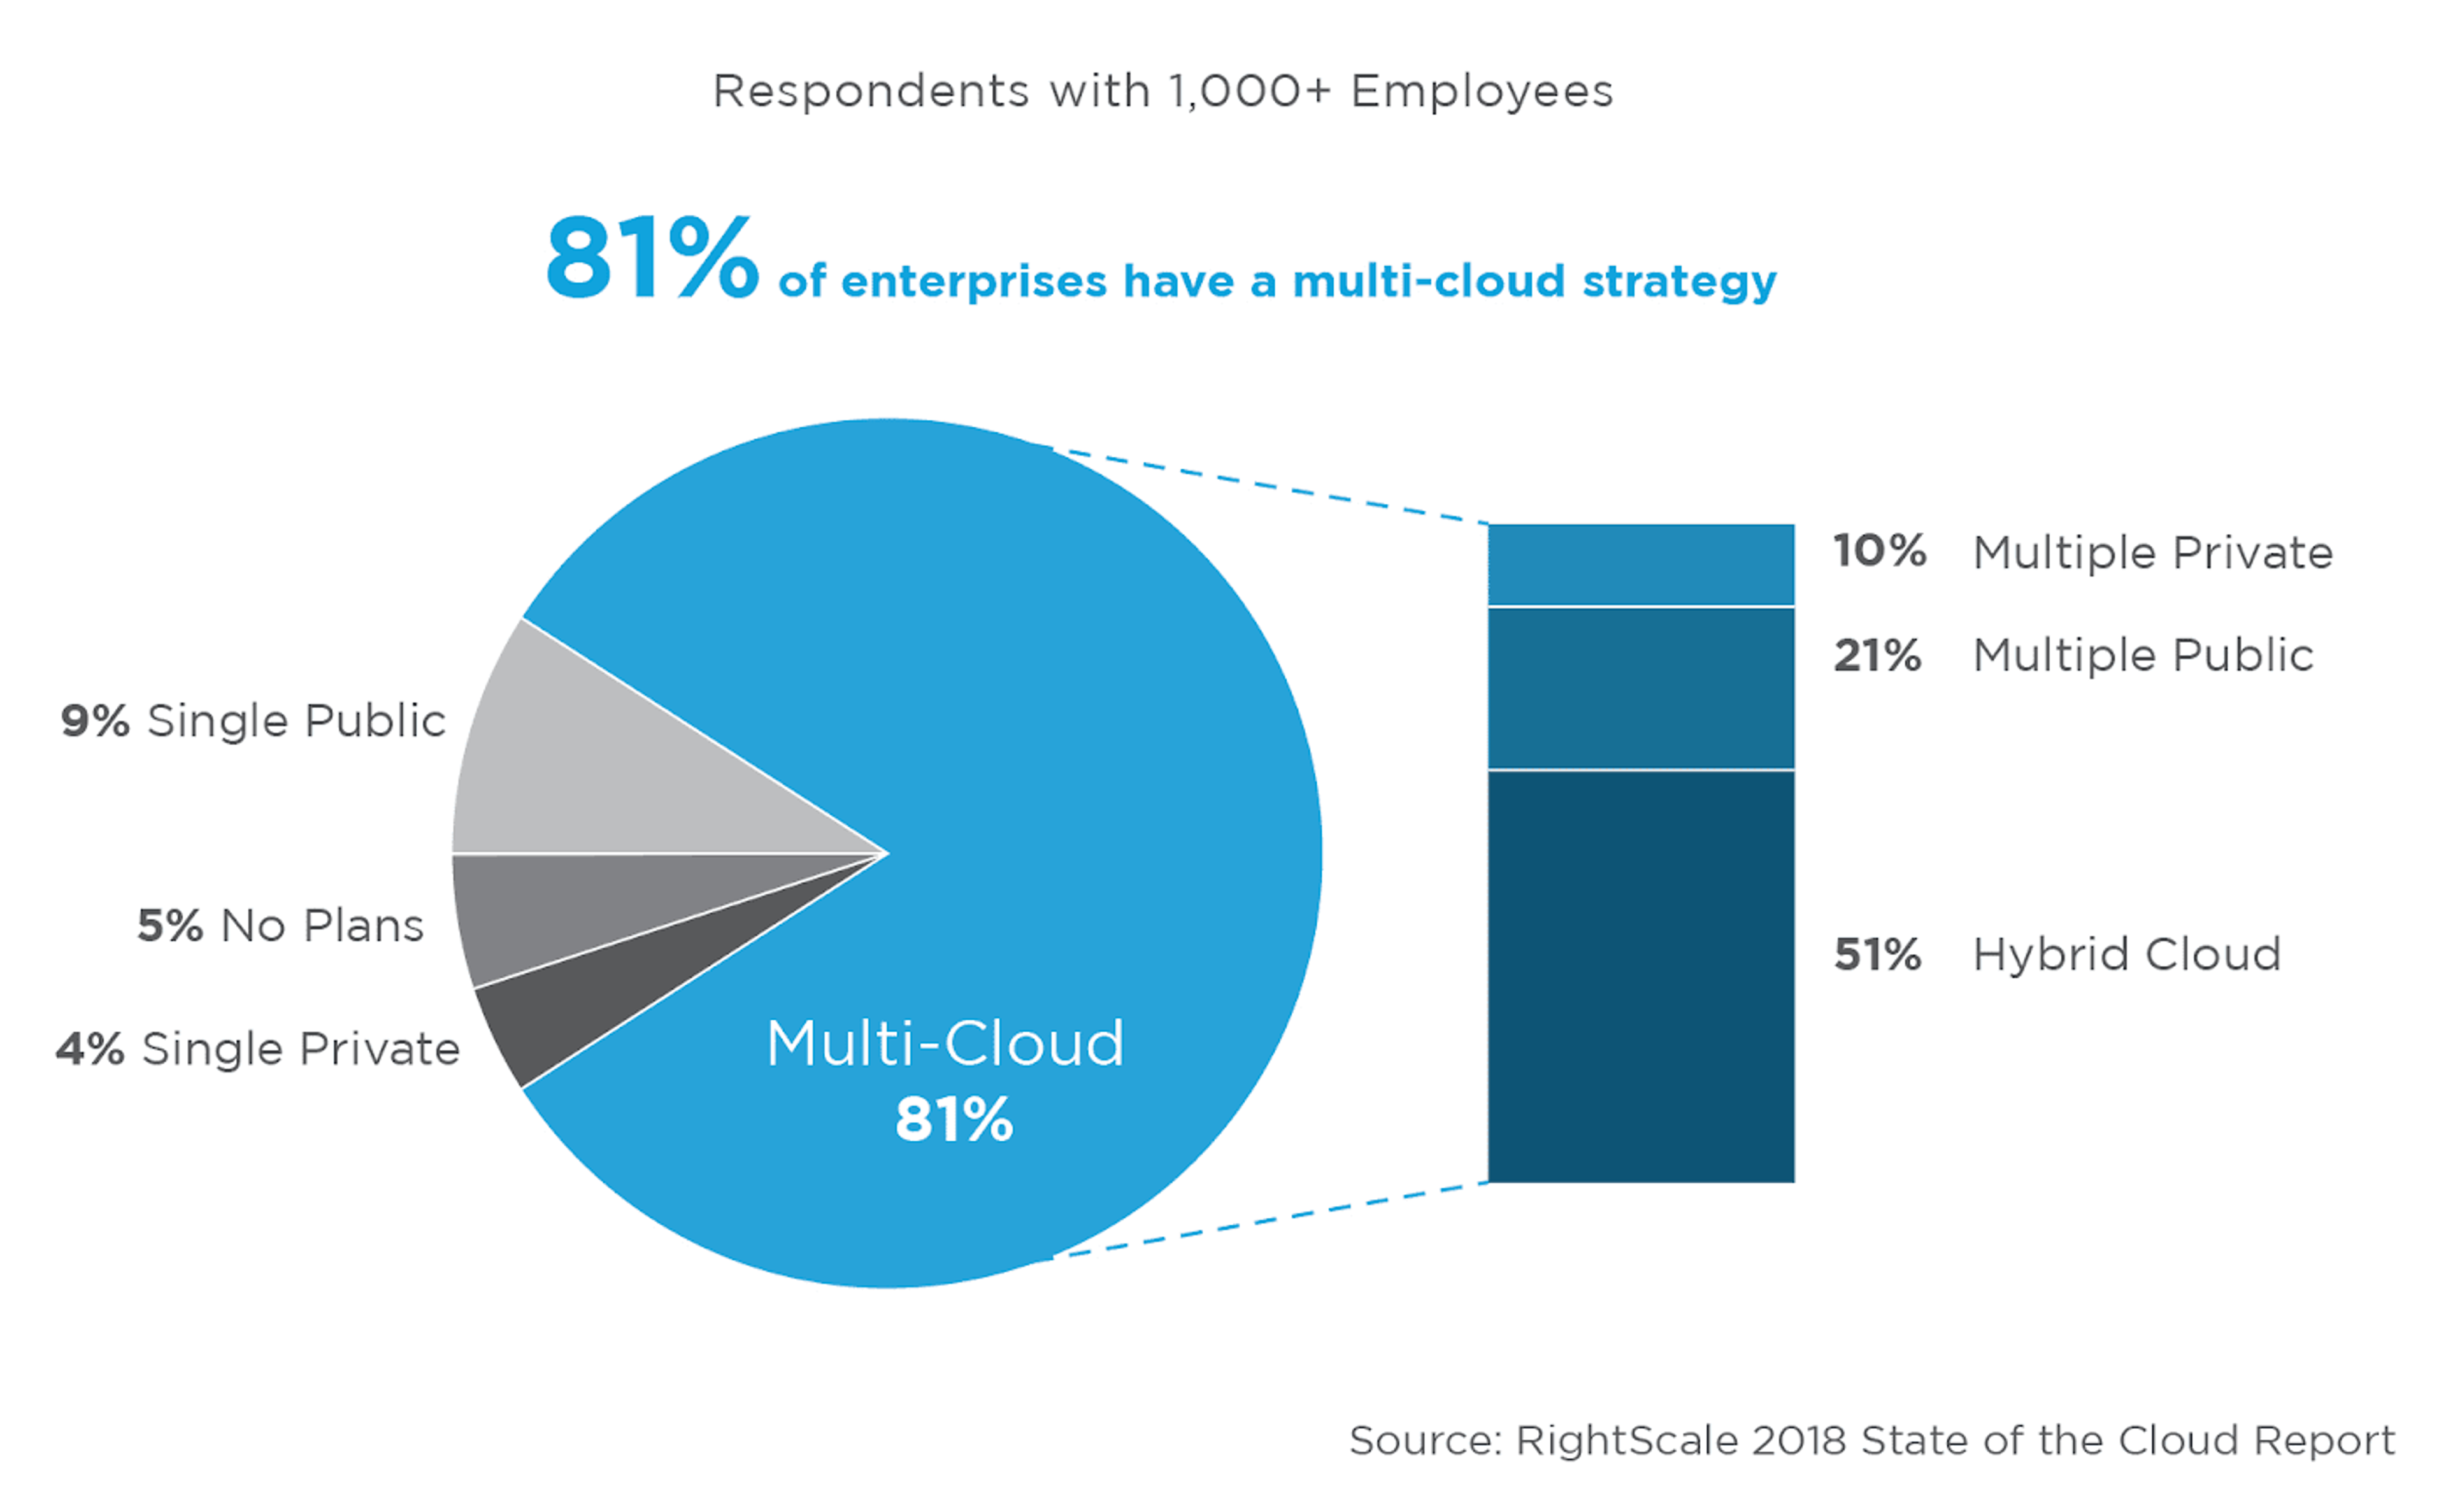 The strong majority of enterprises are adopting multi-cloud strategies, with 51 percent citing hybrid cloud.